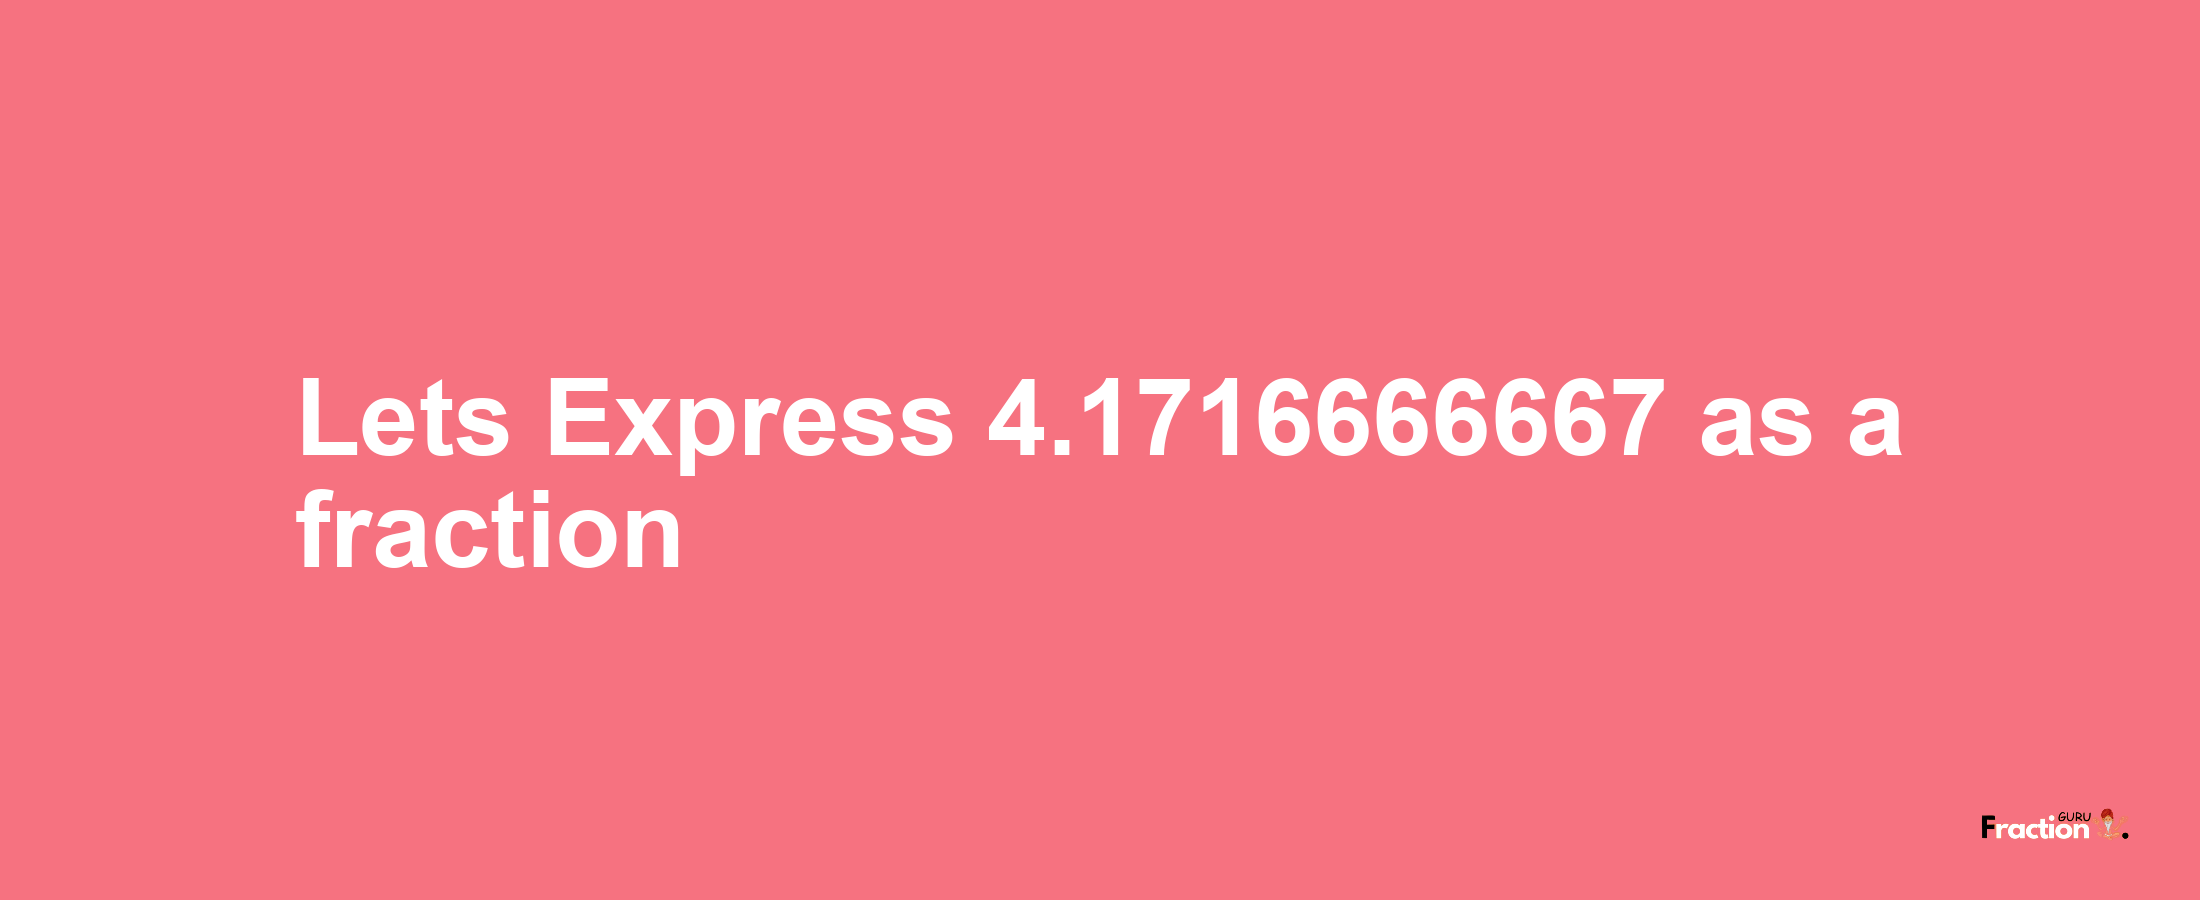 Lets Express 4.1716666667 as afraction